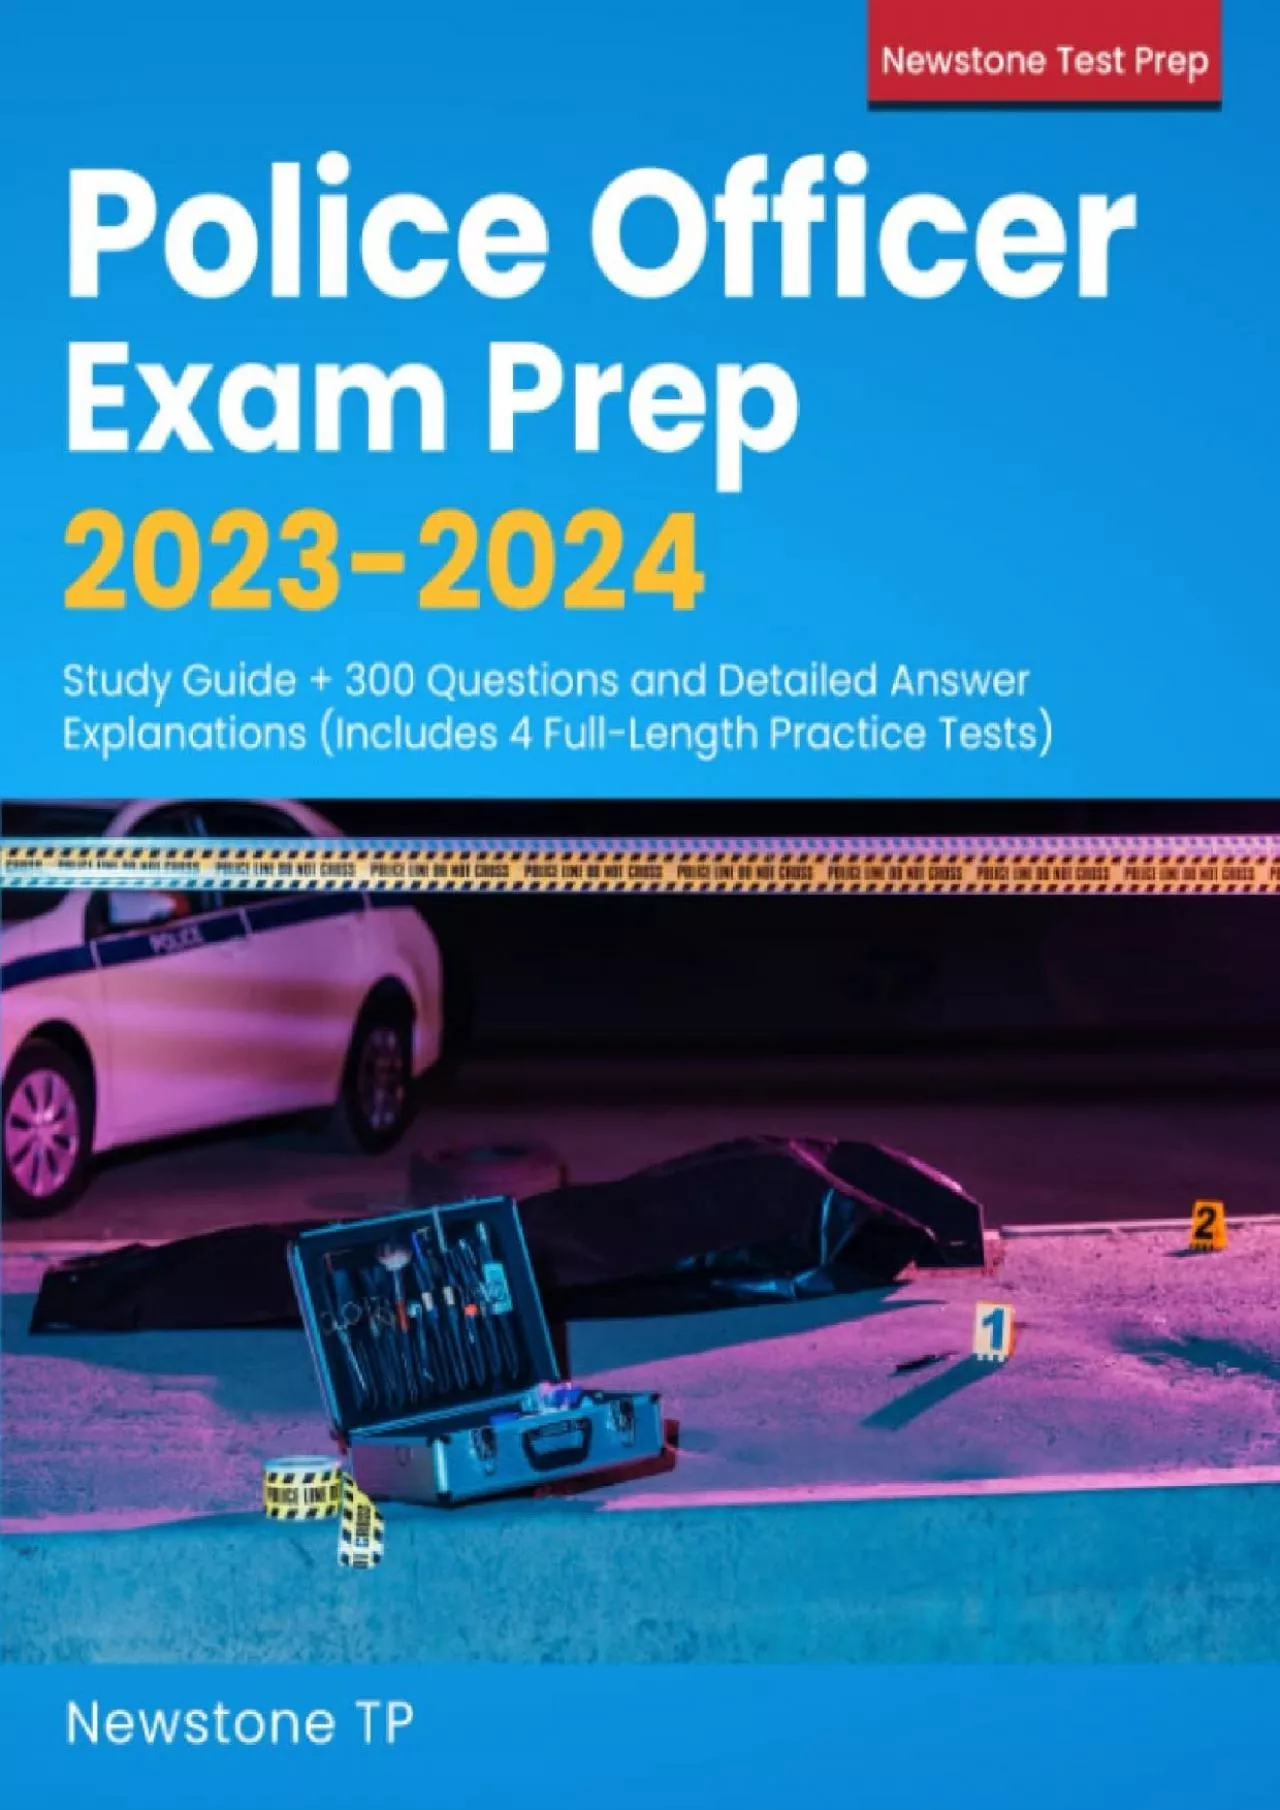 [EBOOK] Police Officer Exam Prep 2023-2024: Study Guide + 300 Questions and Detailed Answer